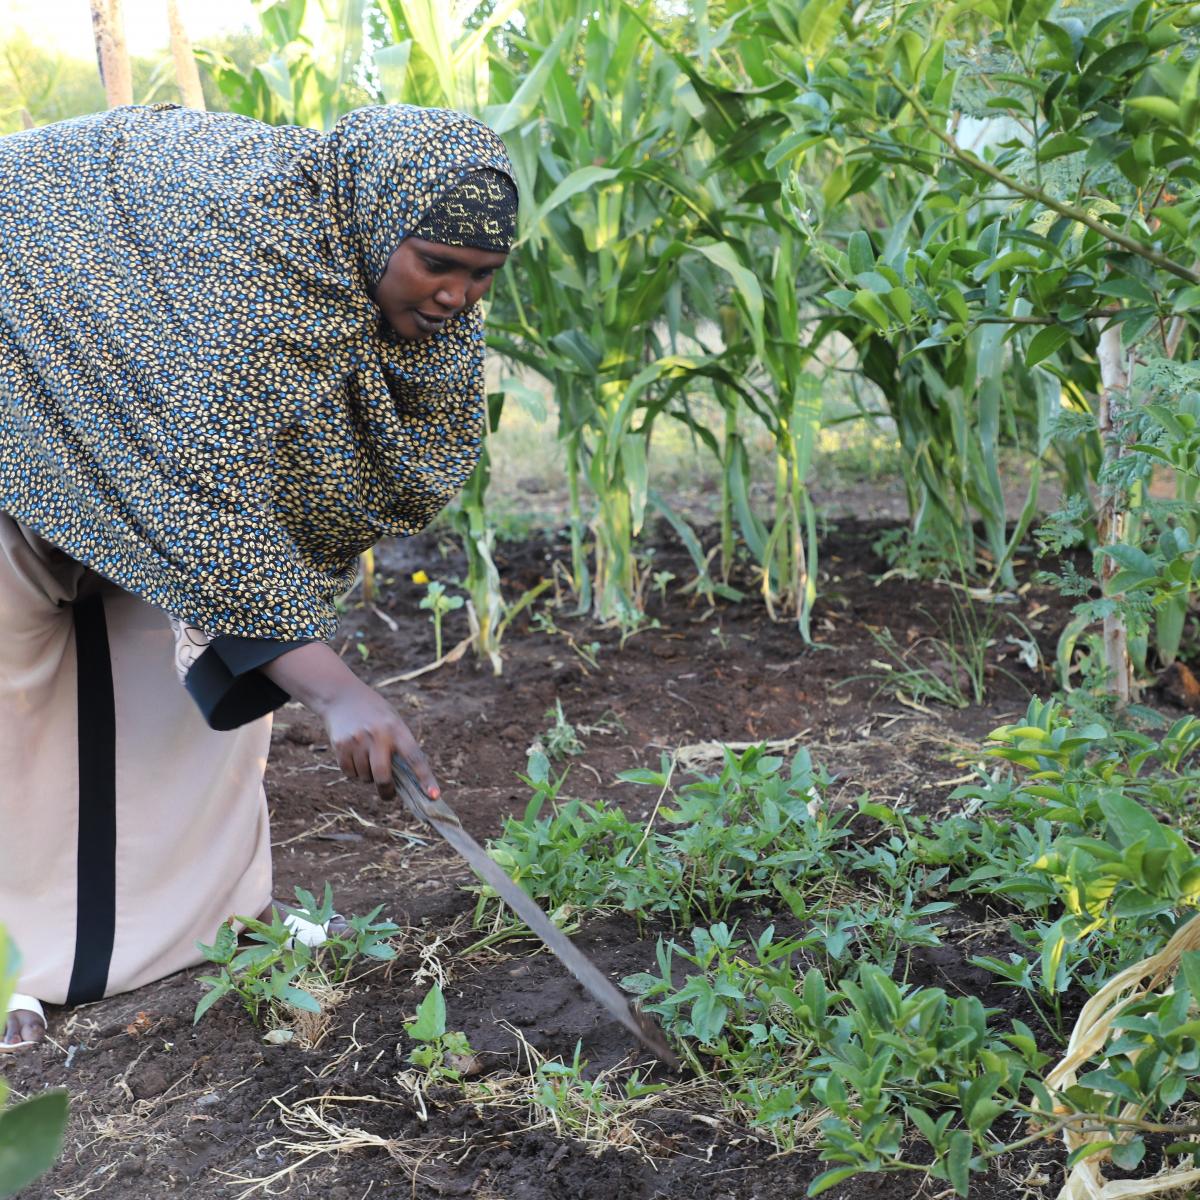 Shinda tending to her farm, Isiolo County, USAID's LMS